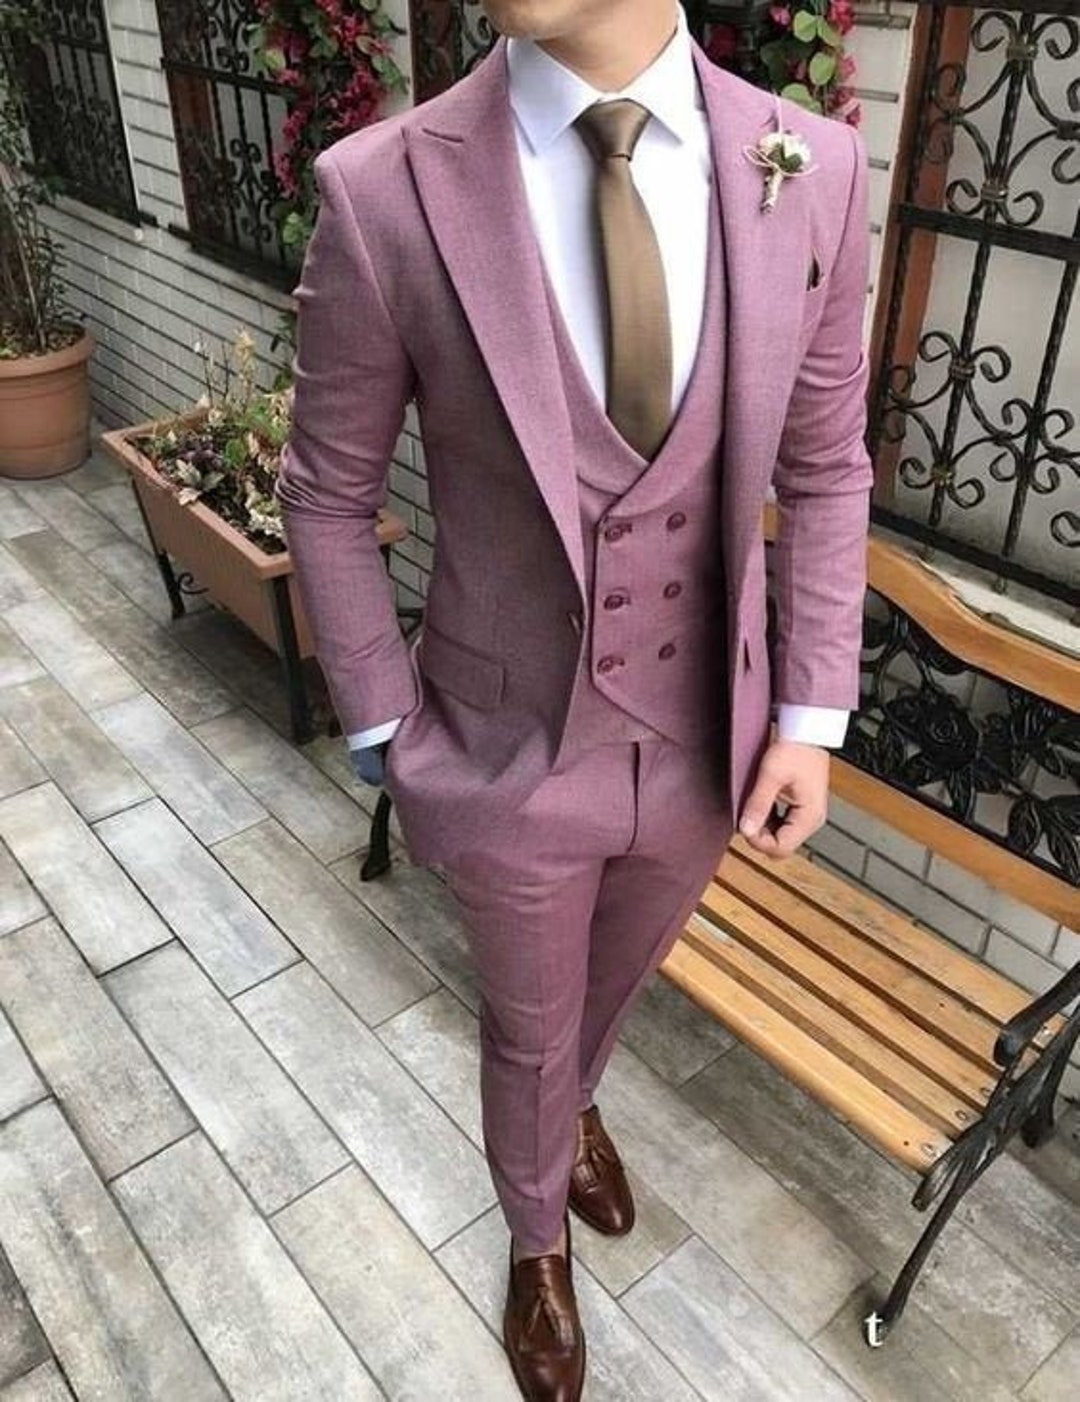 New Handmade Pink Two Piece Coat Suit for Men for Wedding and Events - Etsy